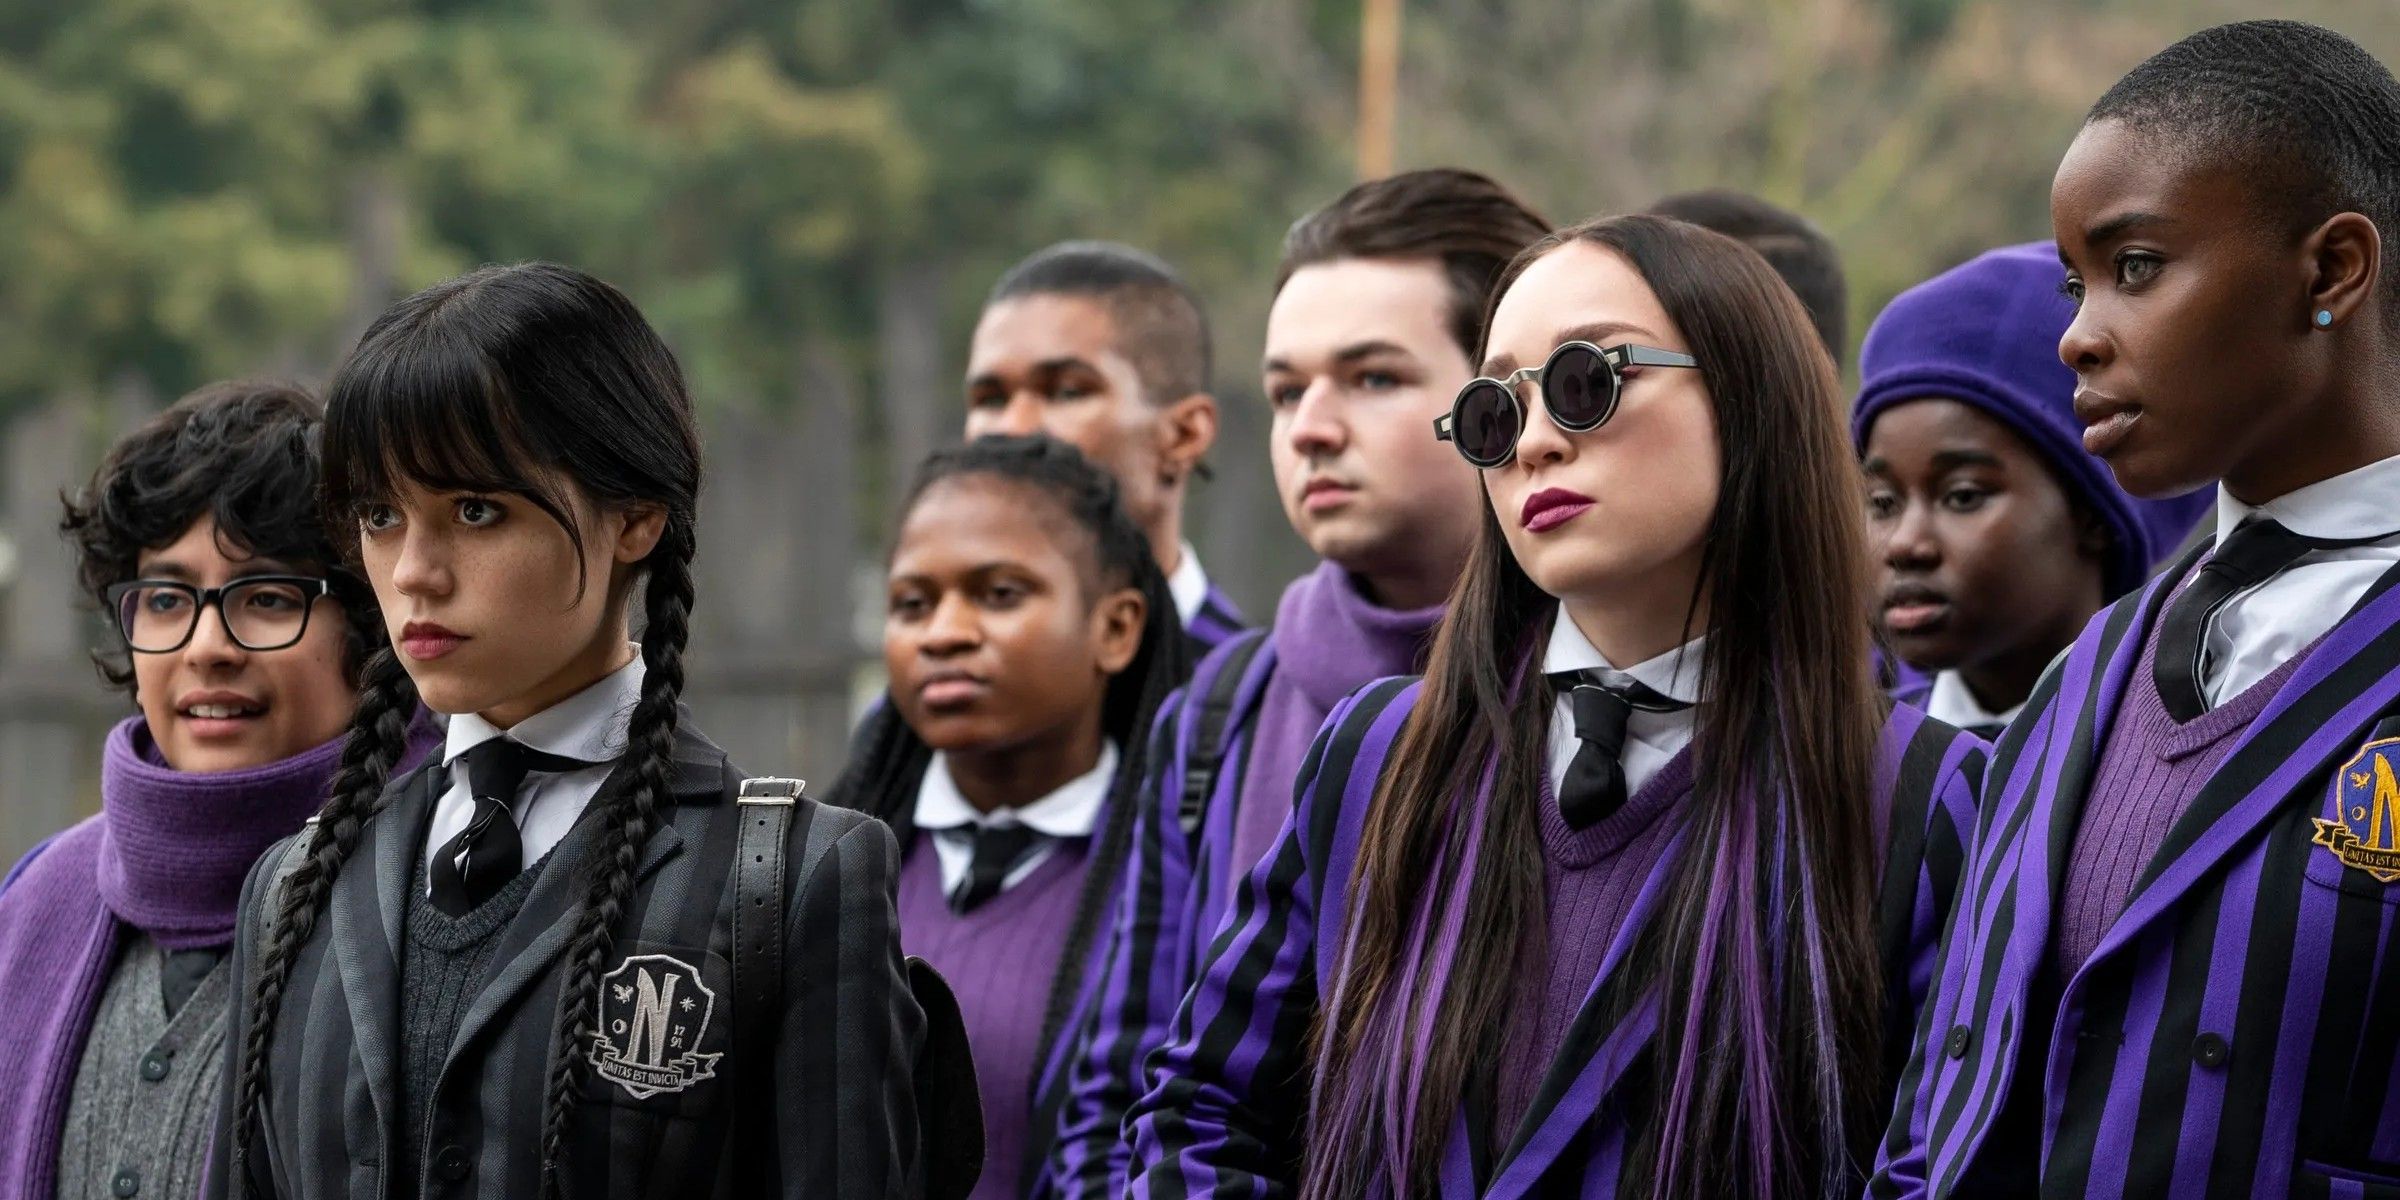 Jenna Ortega as Wednesday Addams with the whole team of outcasts in Wednesday.